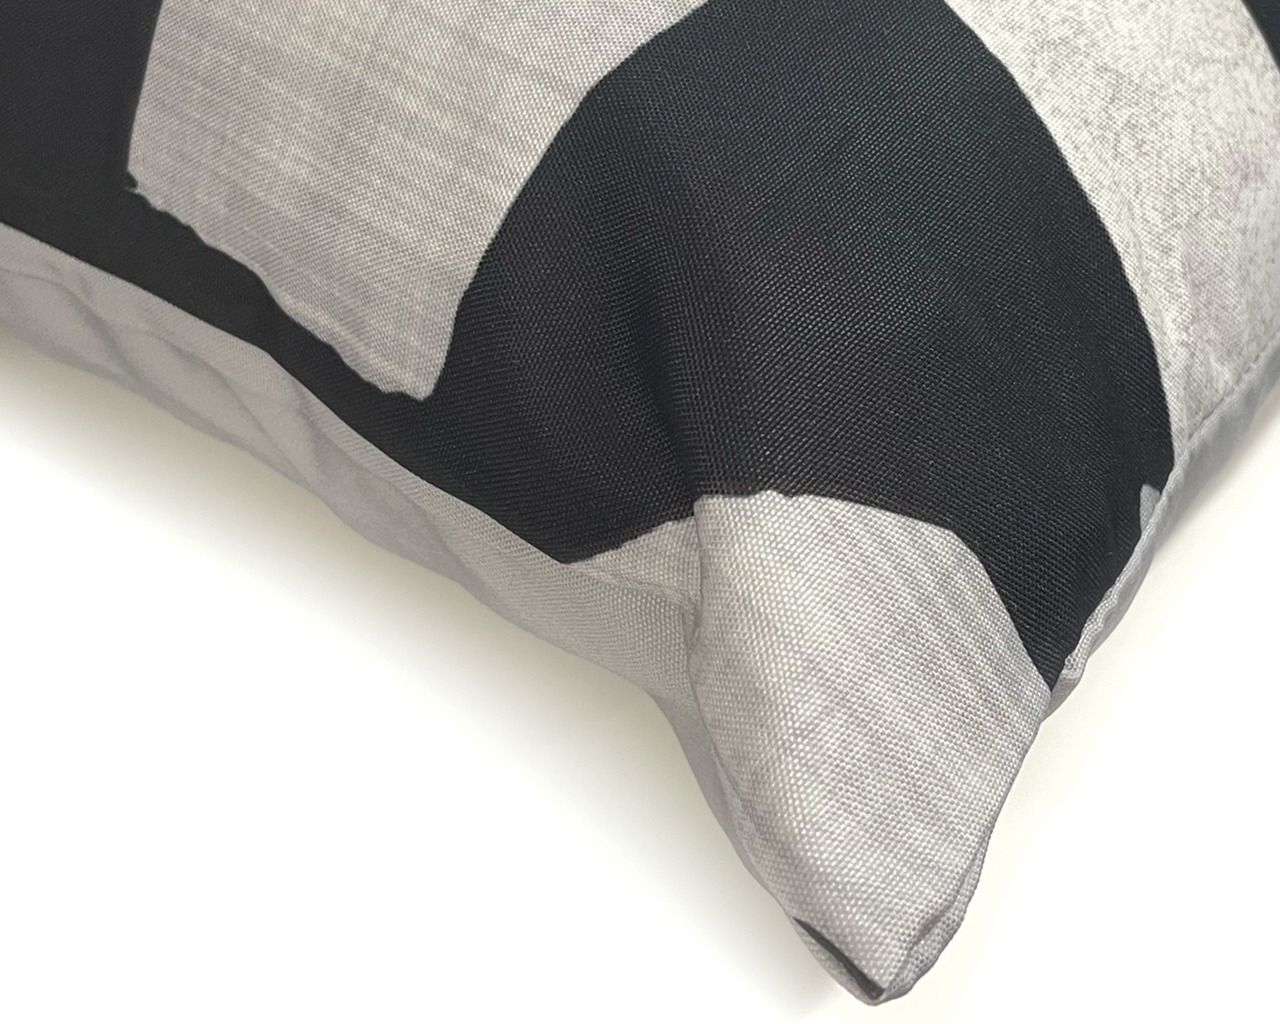 Ada Cloudy Grey Cushion 50cm, , hi-res image number null